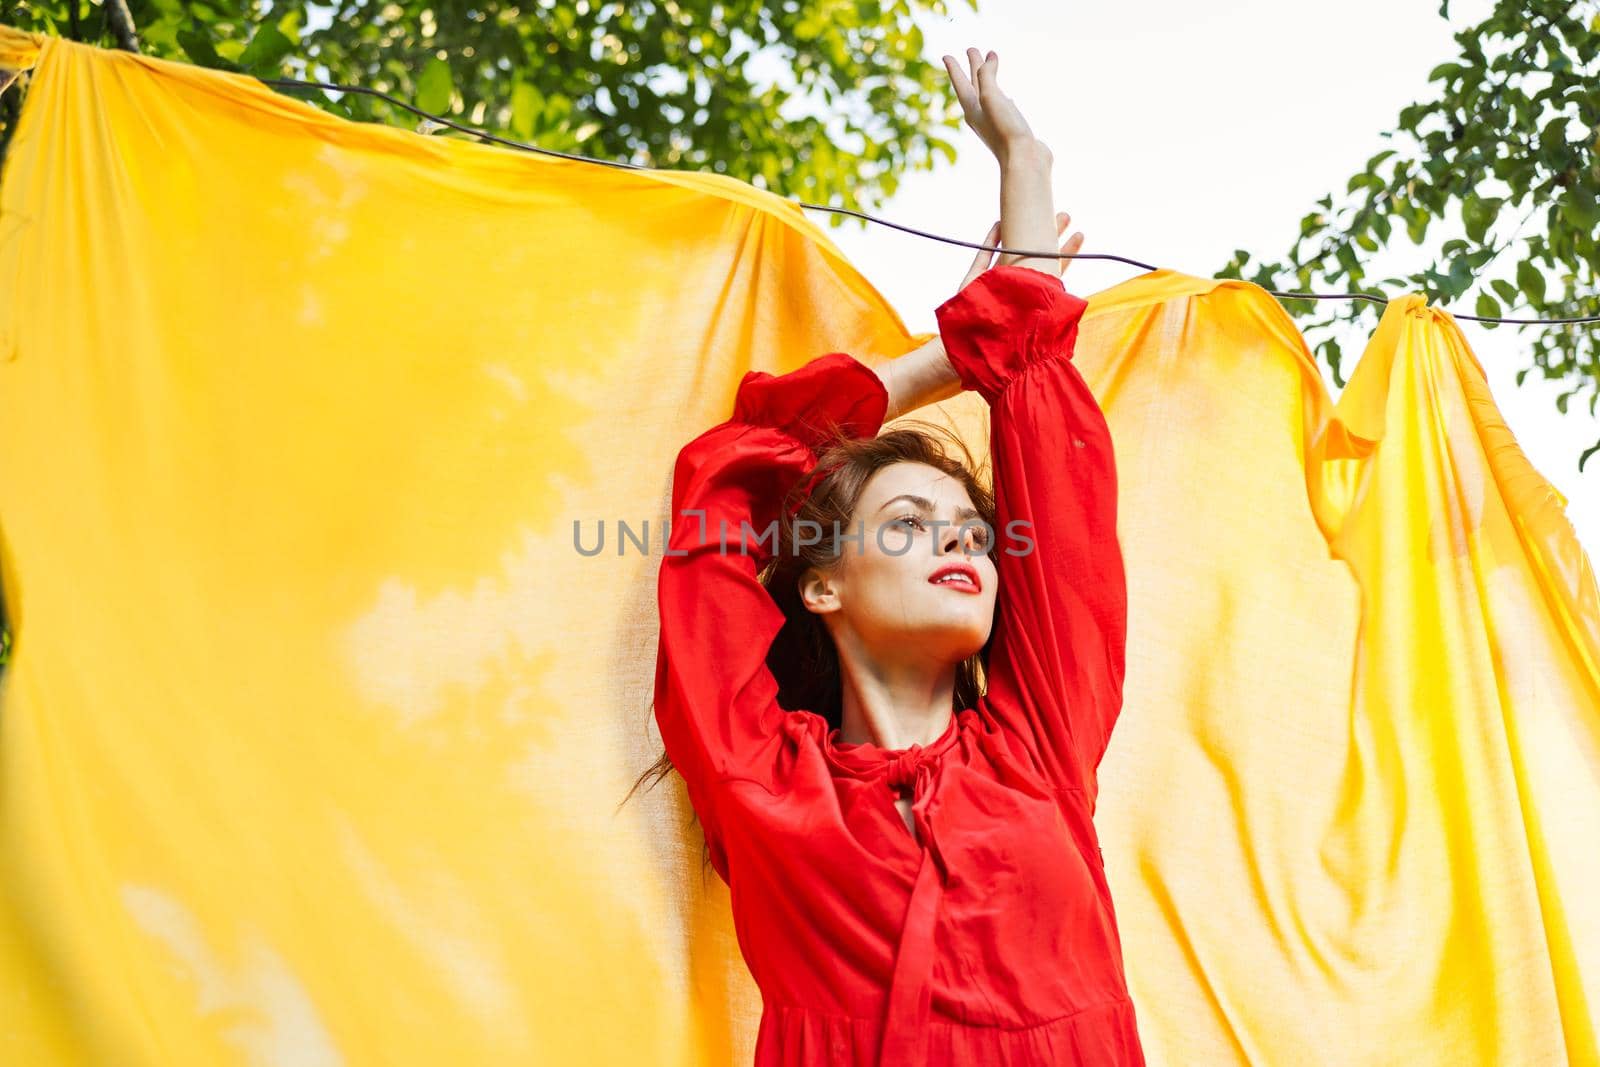 woman in red dress outdoors yellow bedspread by Vichizh